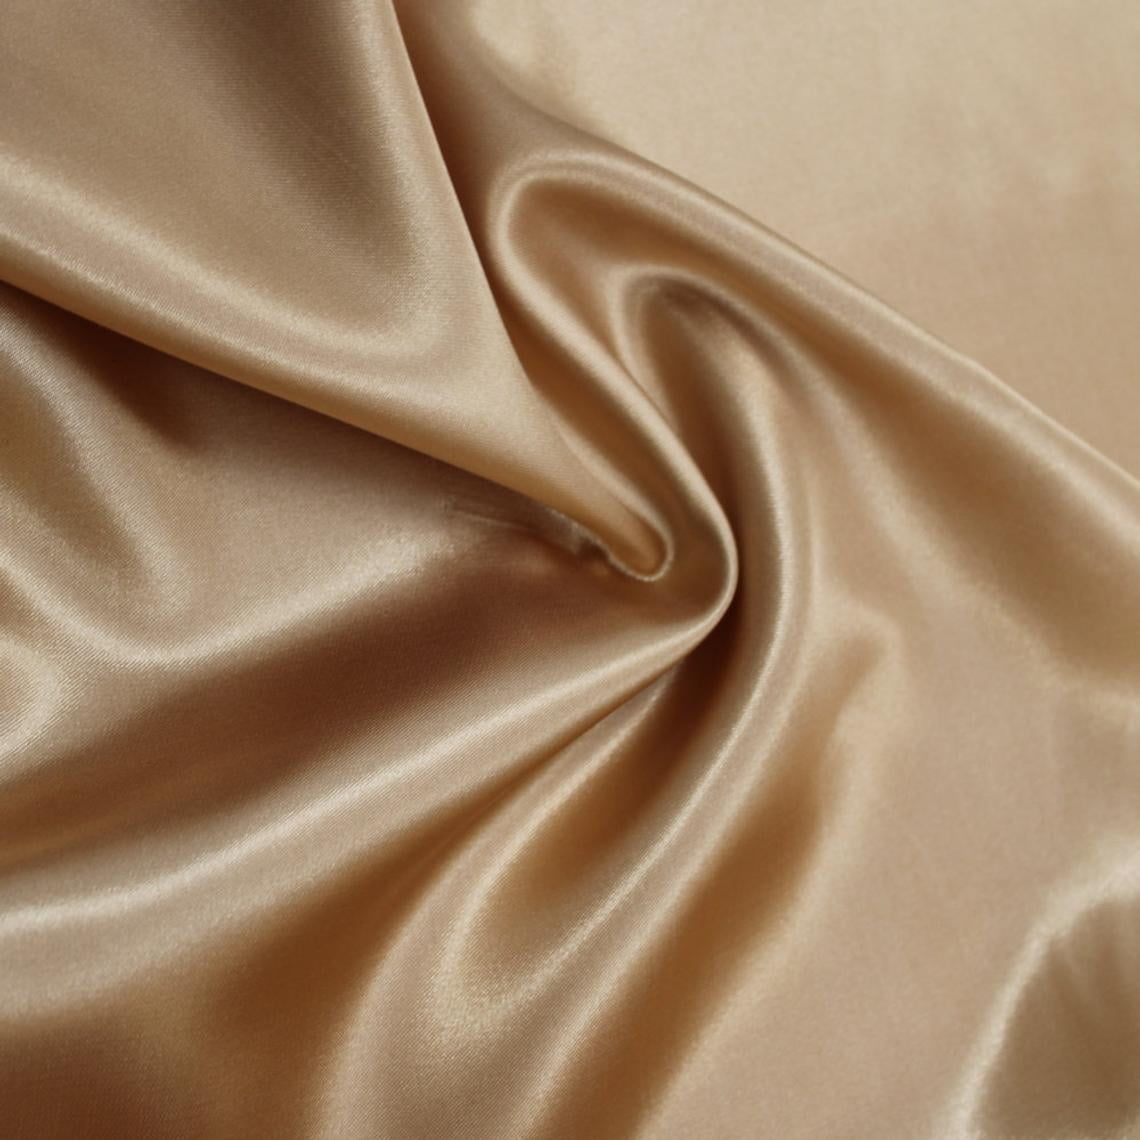 Crafts 60 inches Wide by The Yard Decor Charmeuse Bridal Satin Fabric for Wedding Costumes Apparel Dark Gold, 1 Yard